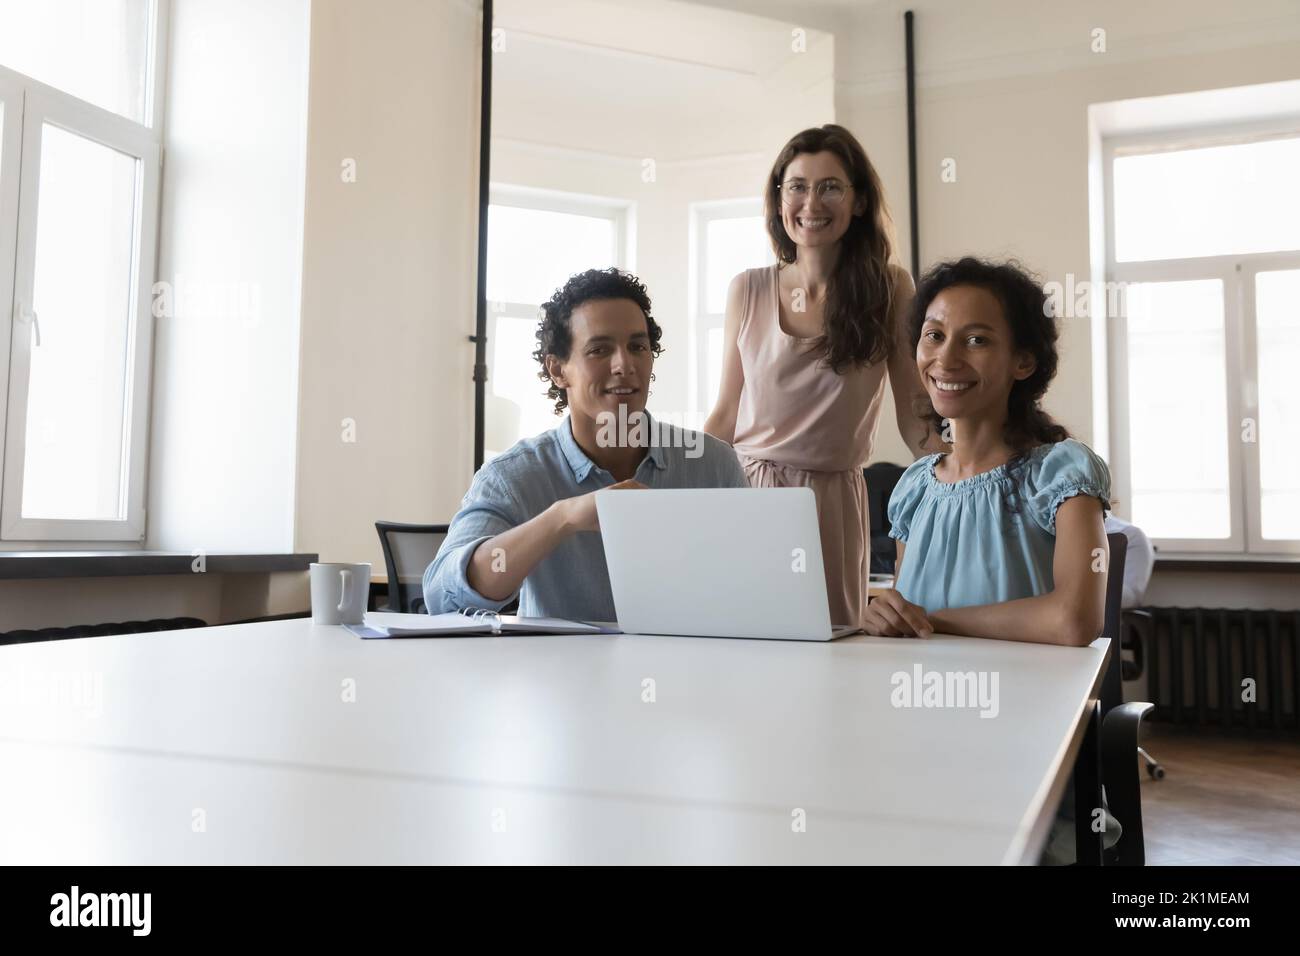 Happy successful business team posing at shared workplace Stock Photo